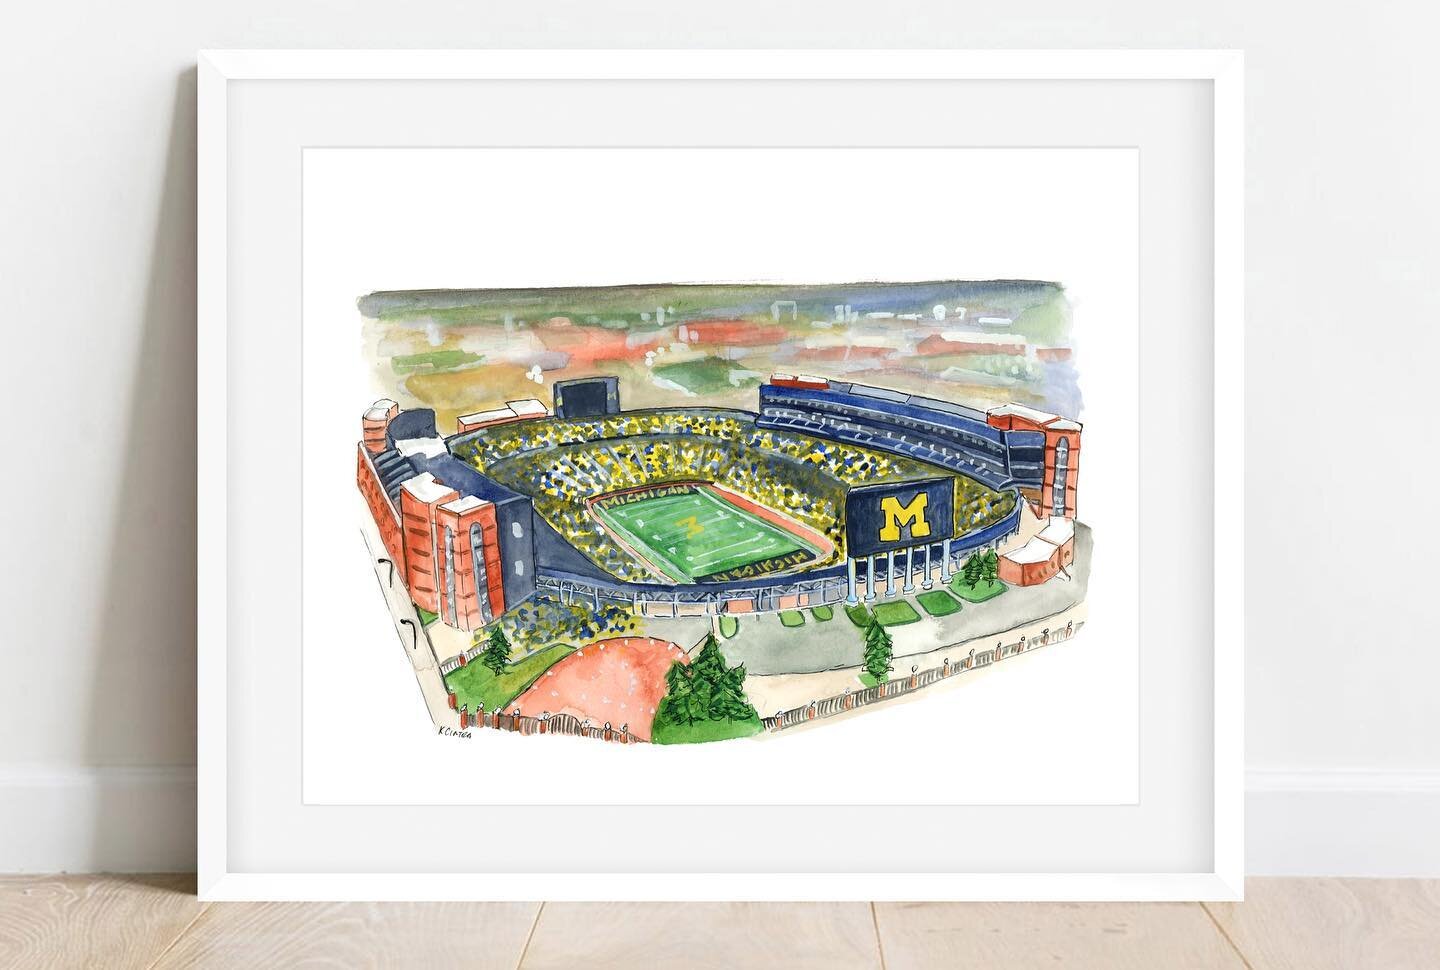 New Print!! In honor of tomorrow&rsquo;s Big Ten Championship Michigan game tomorrow! ! 

Prints available in shop 🏈Makes for the perfect holiday gift for the Michigan fan in your life!